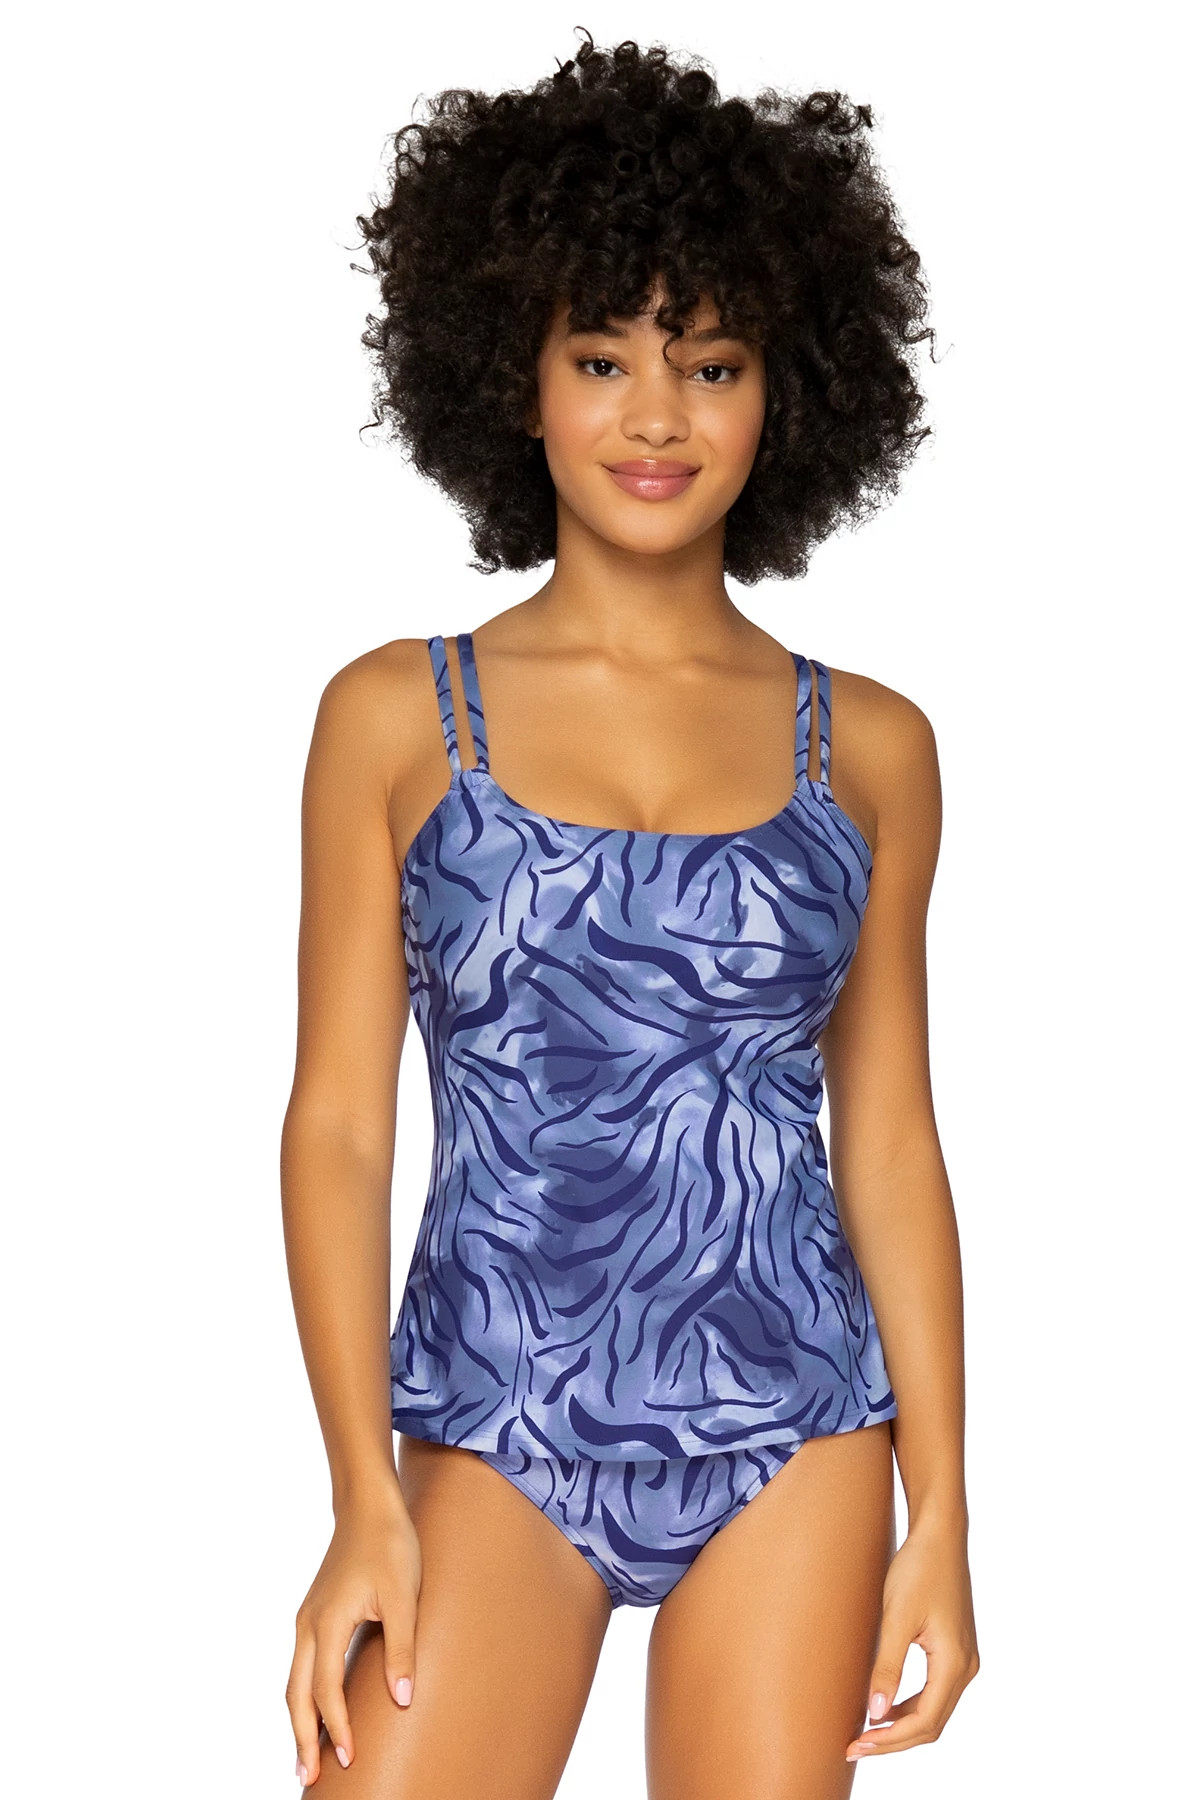 SUMATRA Taylor Over The Shoulder Tankini Top (D+ Cup) image number 1